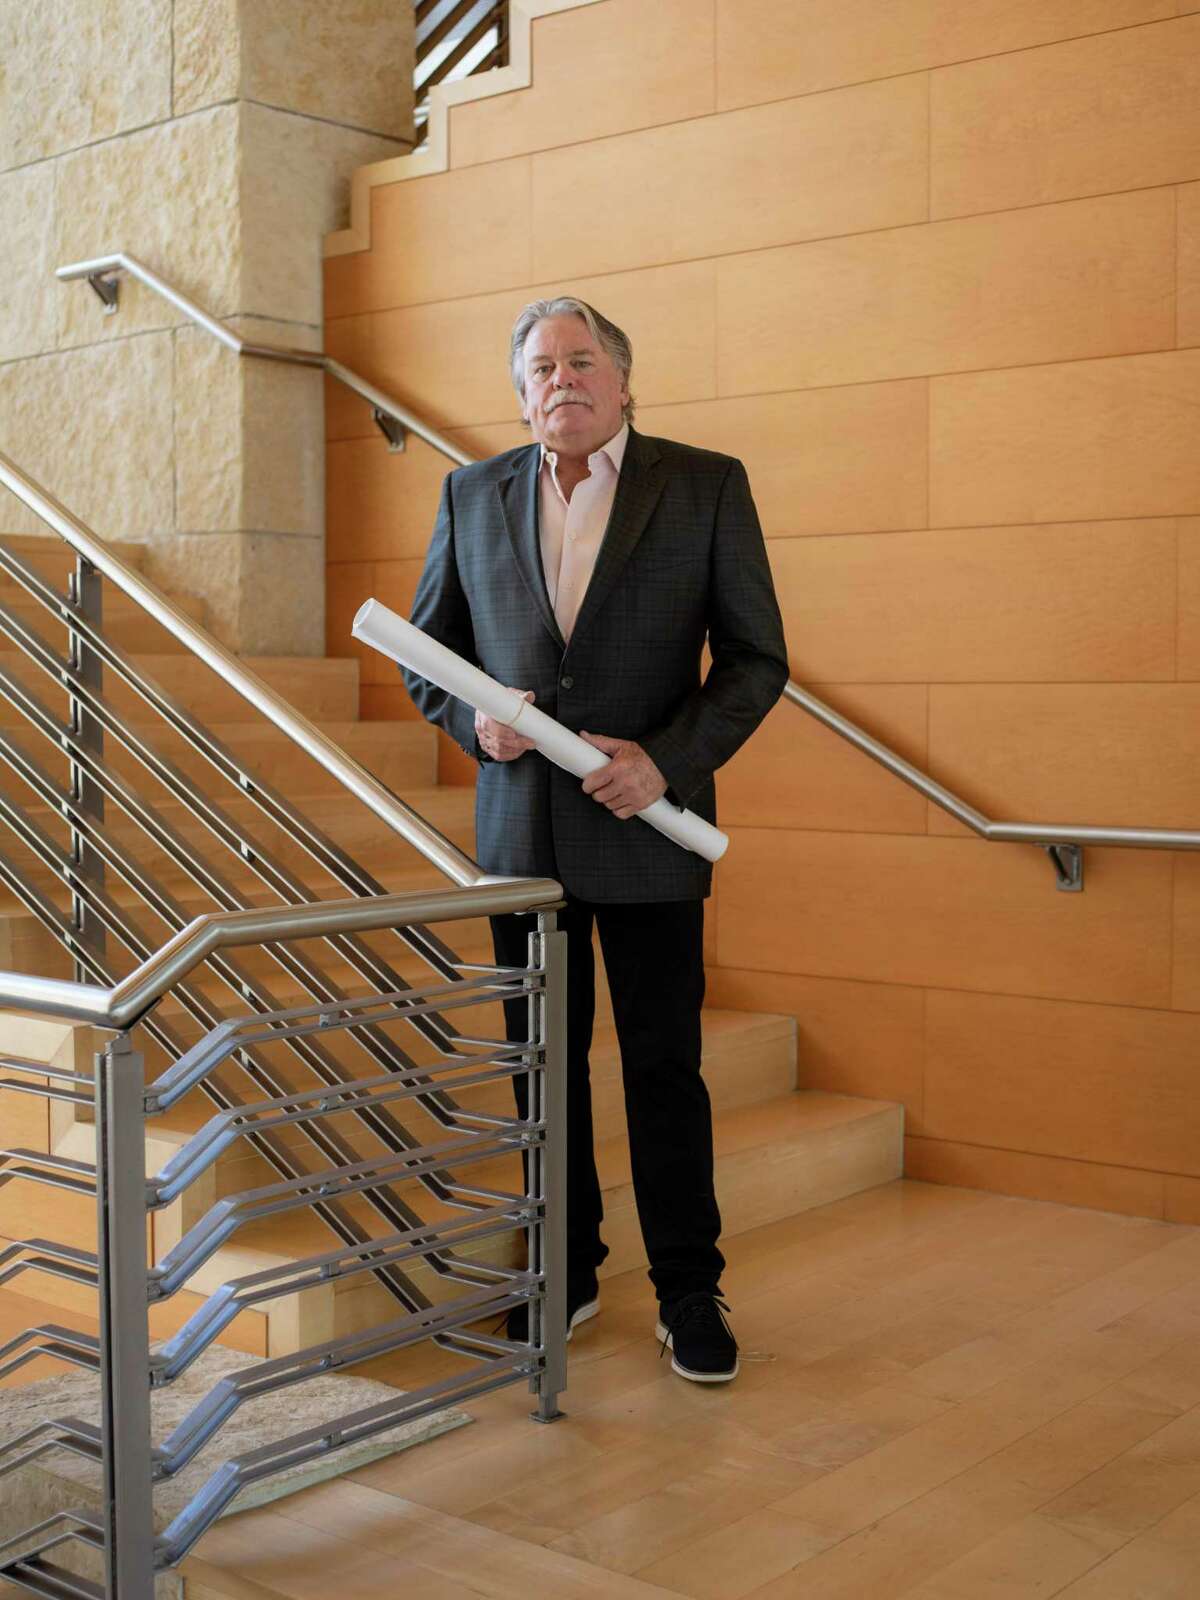 Developer Darren Casey is this week's Texas Power Broker, photographed at Casey Development’s offices in San Antonio, Texas on Thursday, April 18, 2019.